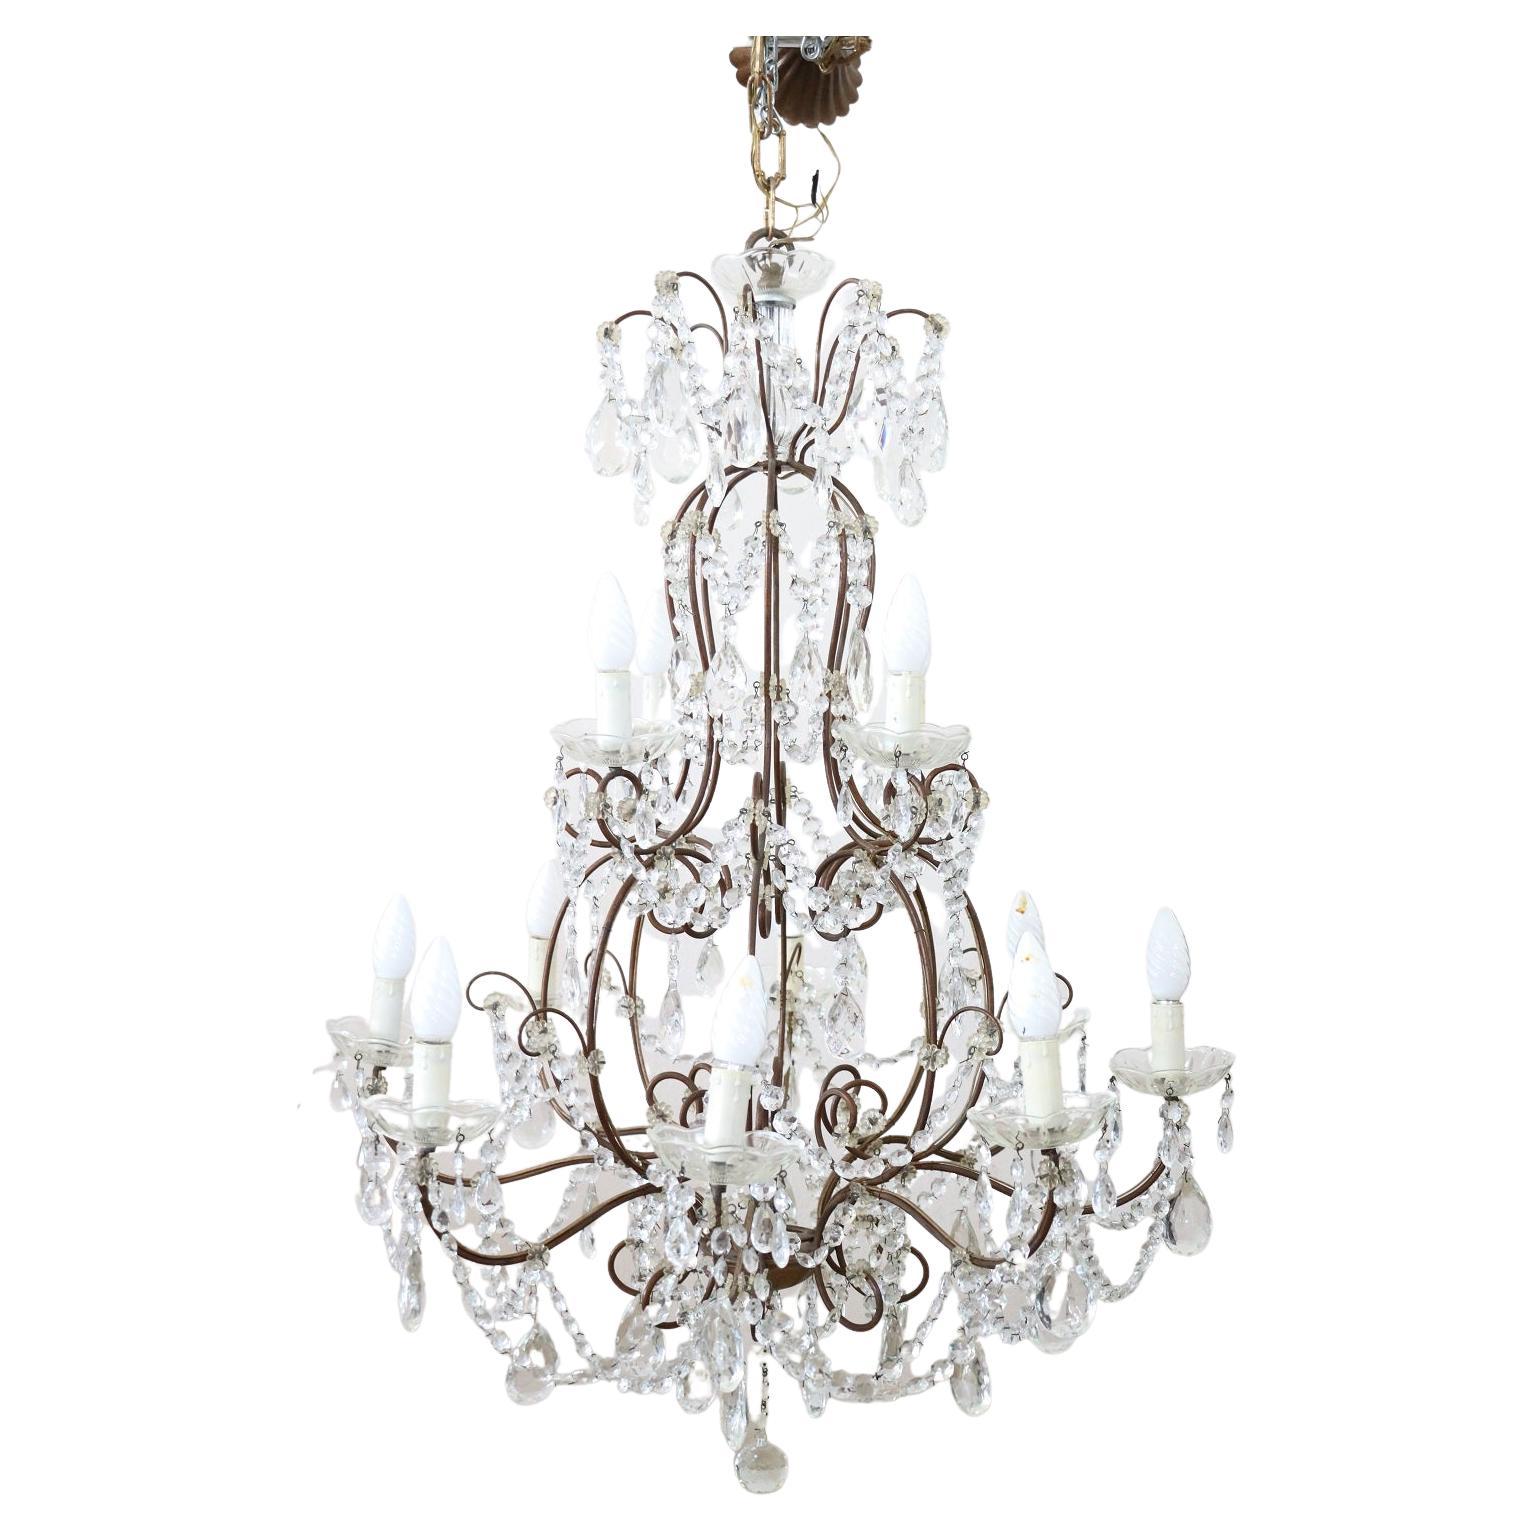 Early 20th Century Italian Louis XVI Style Bronze and Crystals Chandelier For Sale